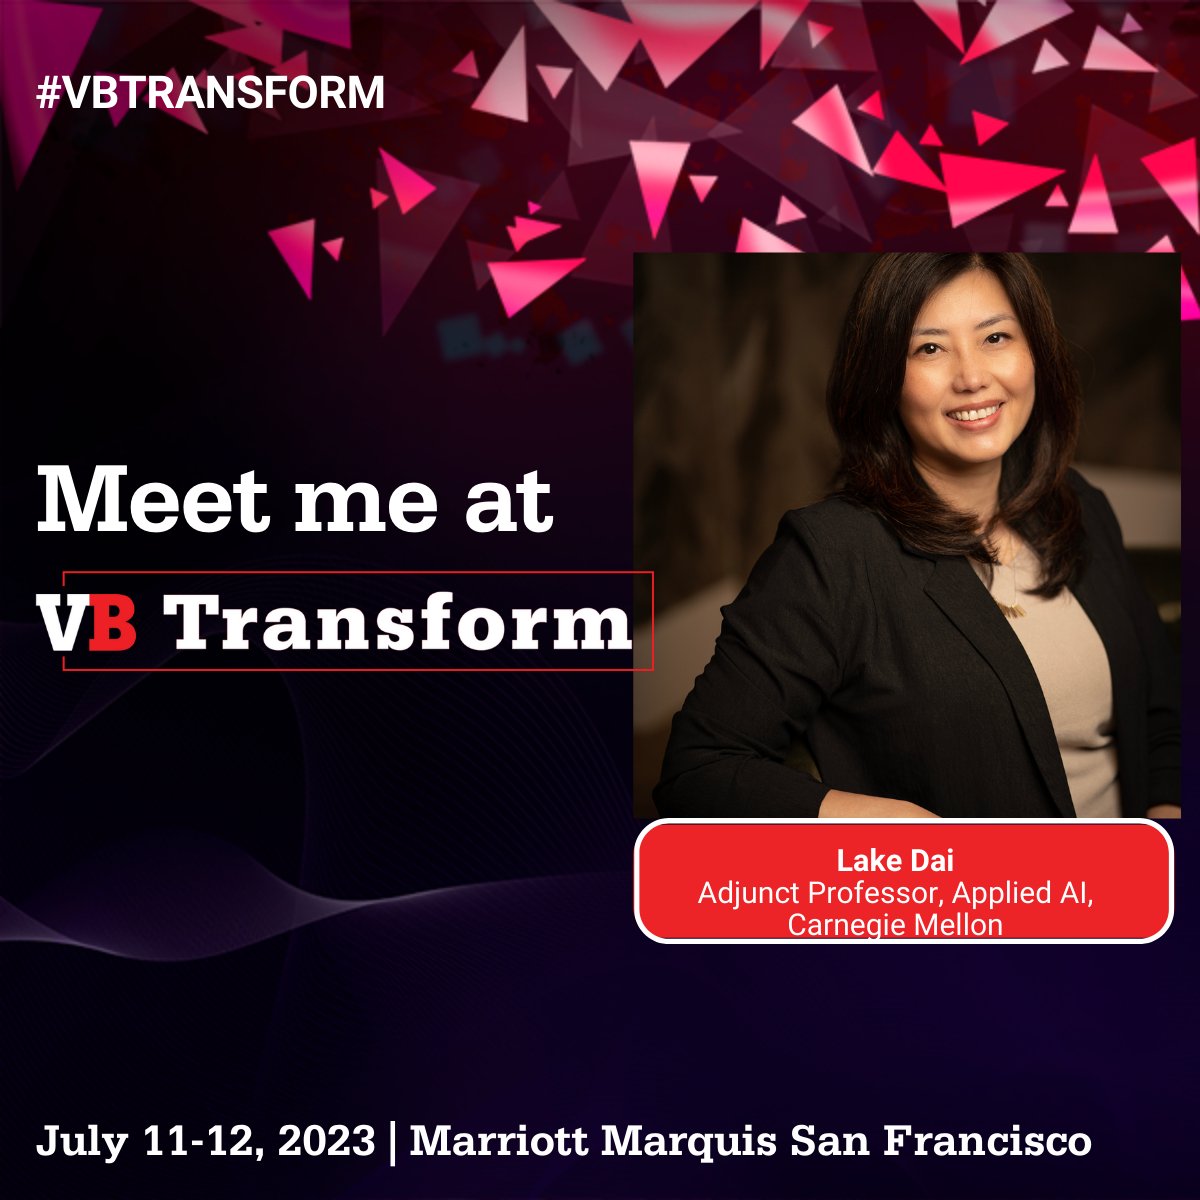 I'm speaking at the VentureBeat conference #Transform on July 11-12th - fireside chats with @Saha_Deban, CEO of @DataRobot, AI experts from Baptist Health South Florida, and @MattCarbonara, Managing Director @CitiVentures. Register link and discount code: linkedin.com/feed/update/ur…